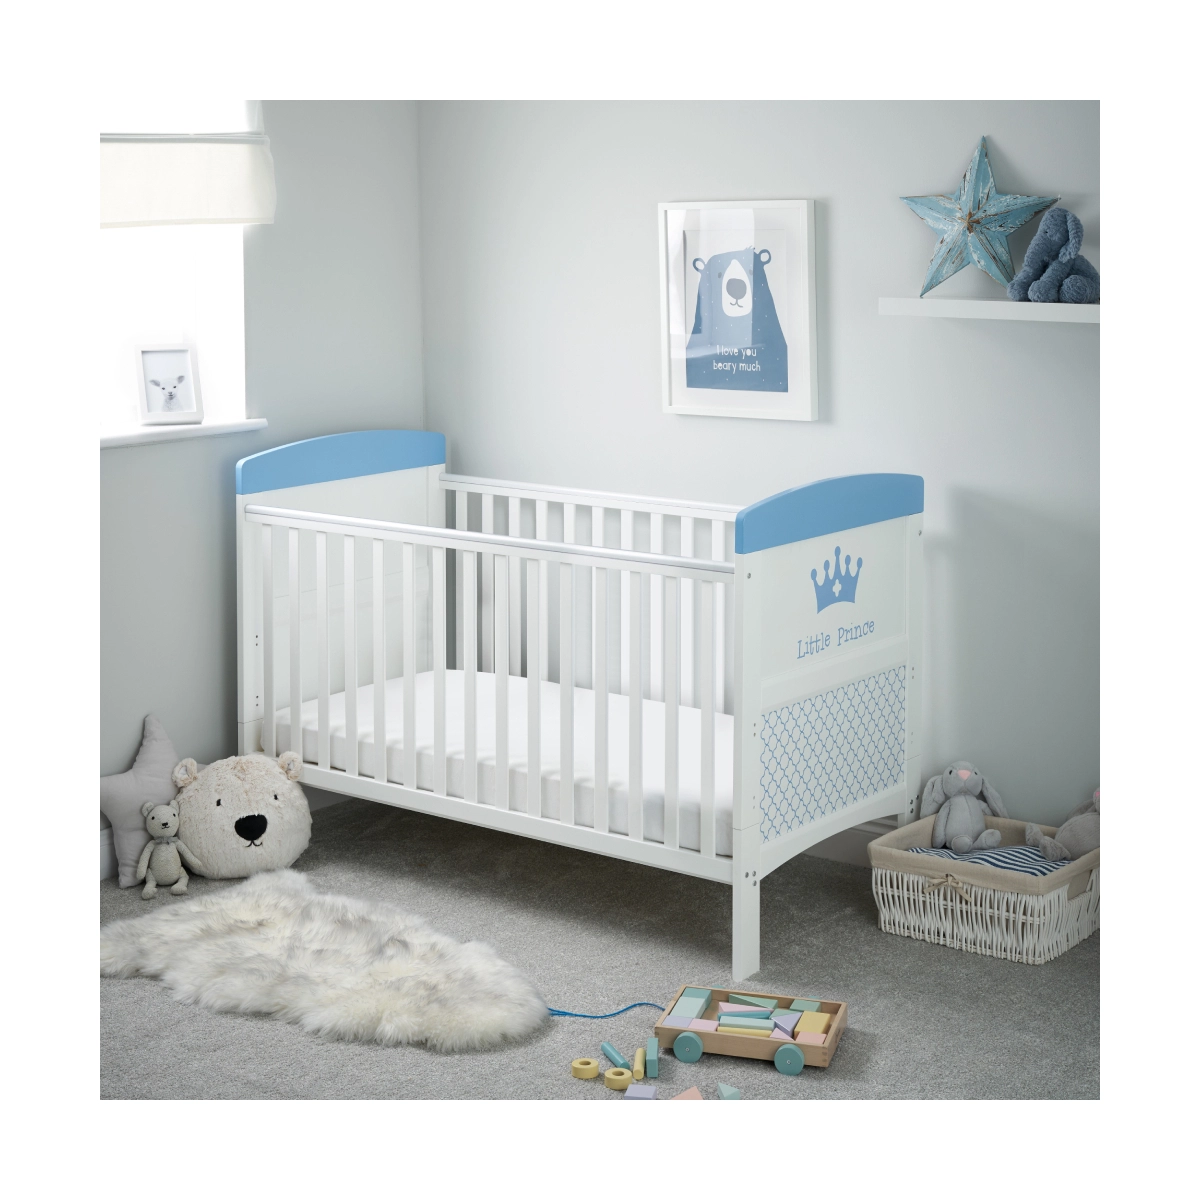 Image of Obaby Grace Inspire Cotbed-Little Prince